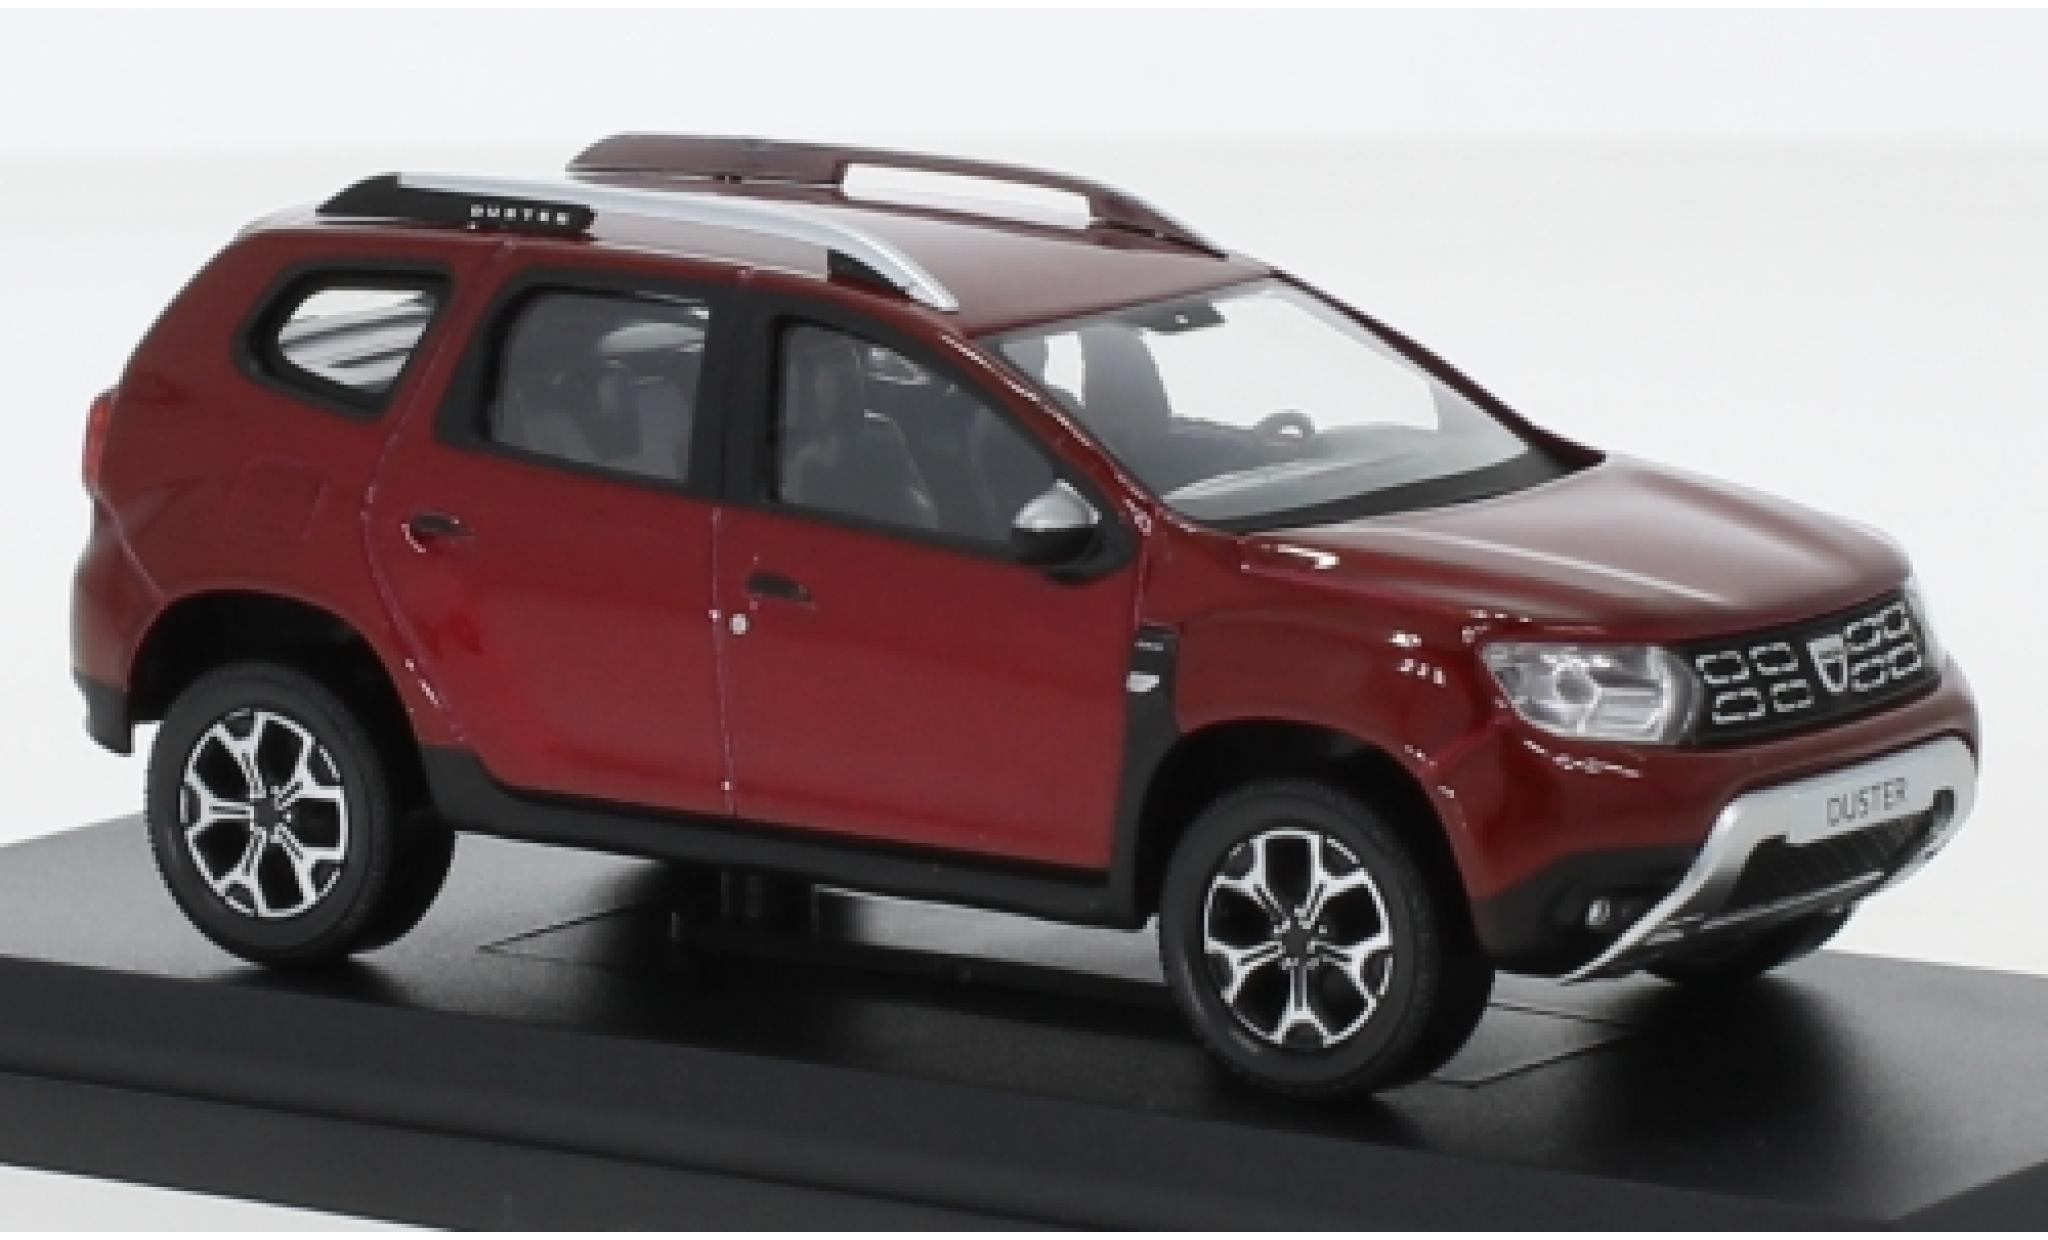 https://www.alldiecast.co.uk/images/images_miniatures/norev-dacia-duster-metallic-rot-2018-1.jpg